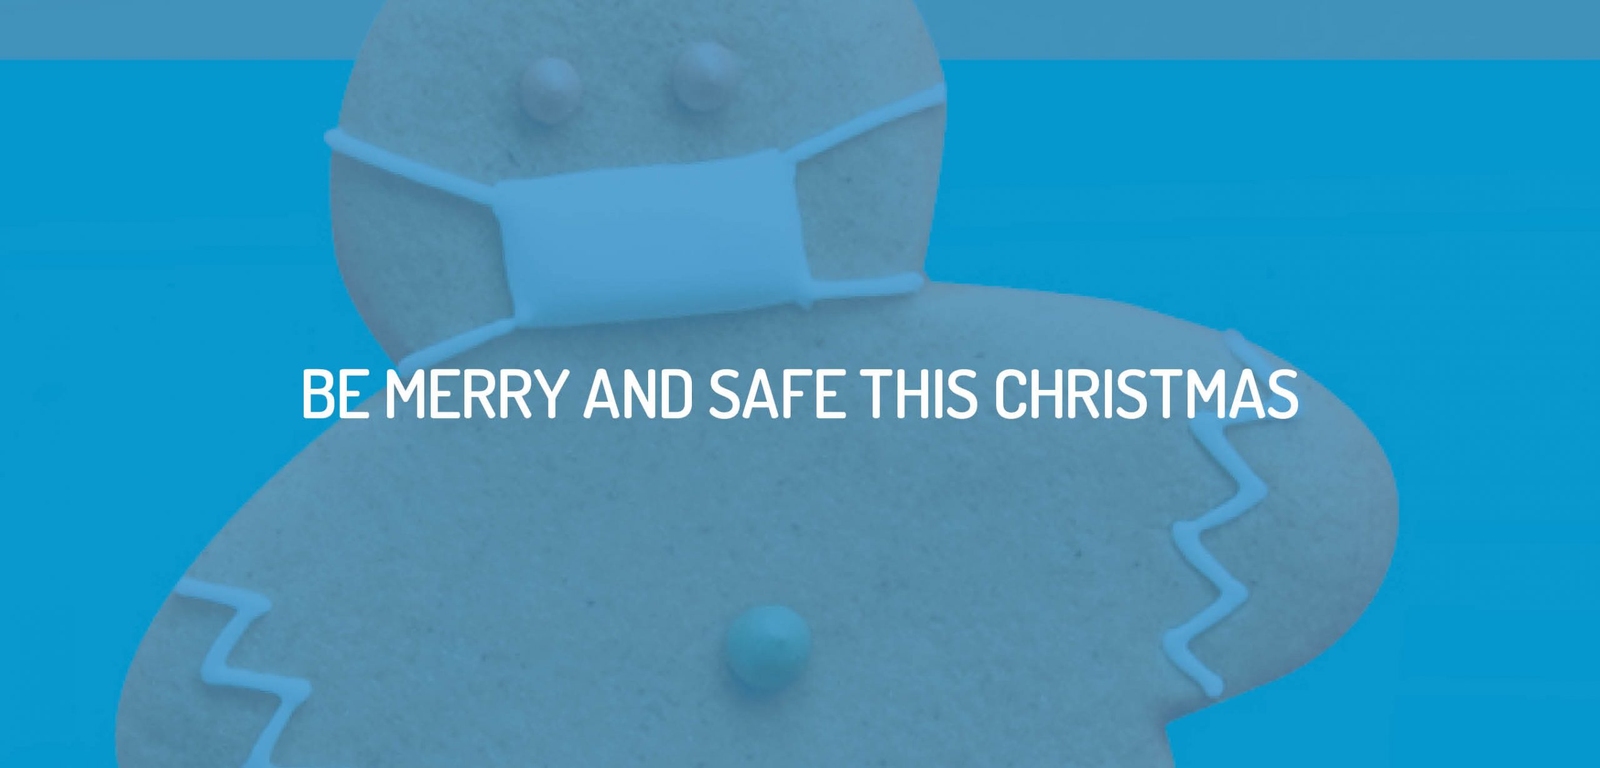 Be Merry and Safe this Christmas